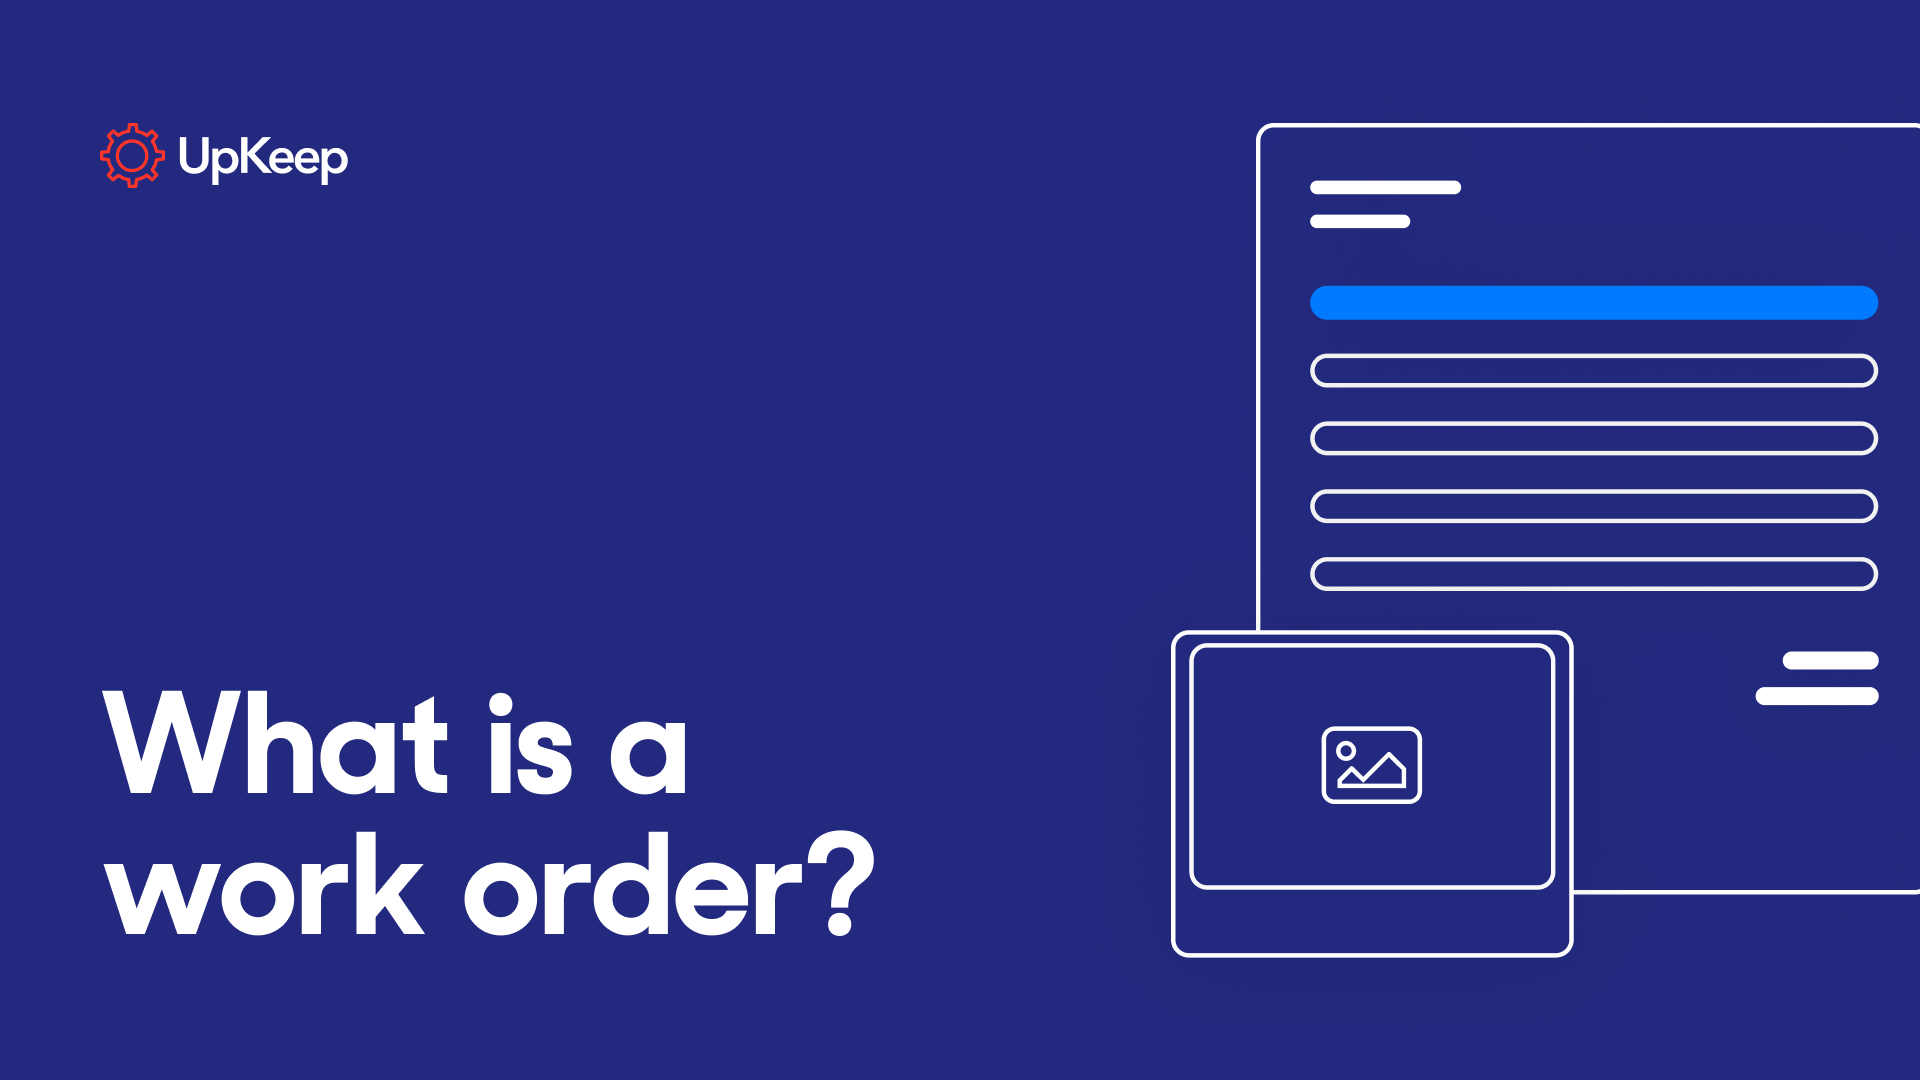 What is a work order?